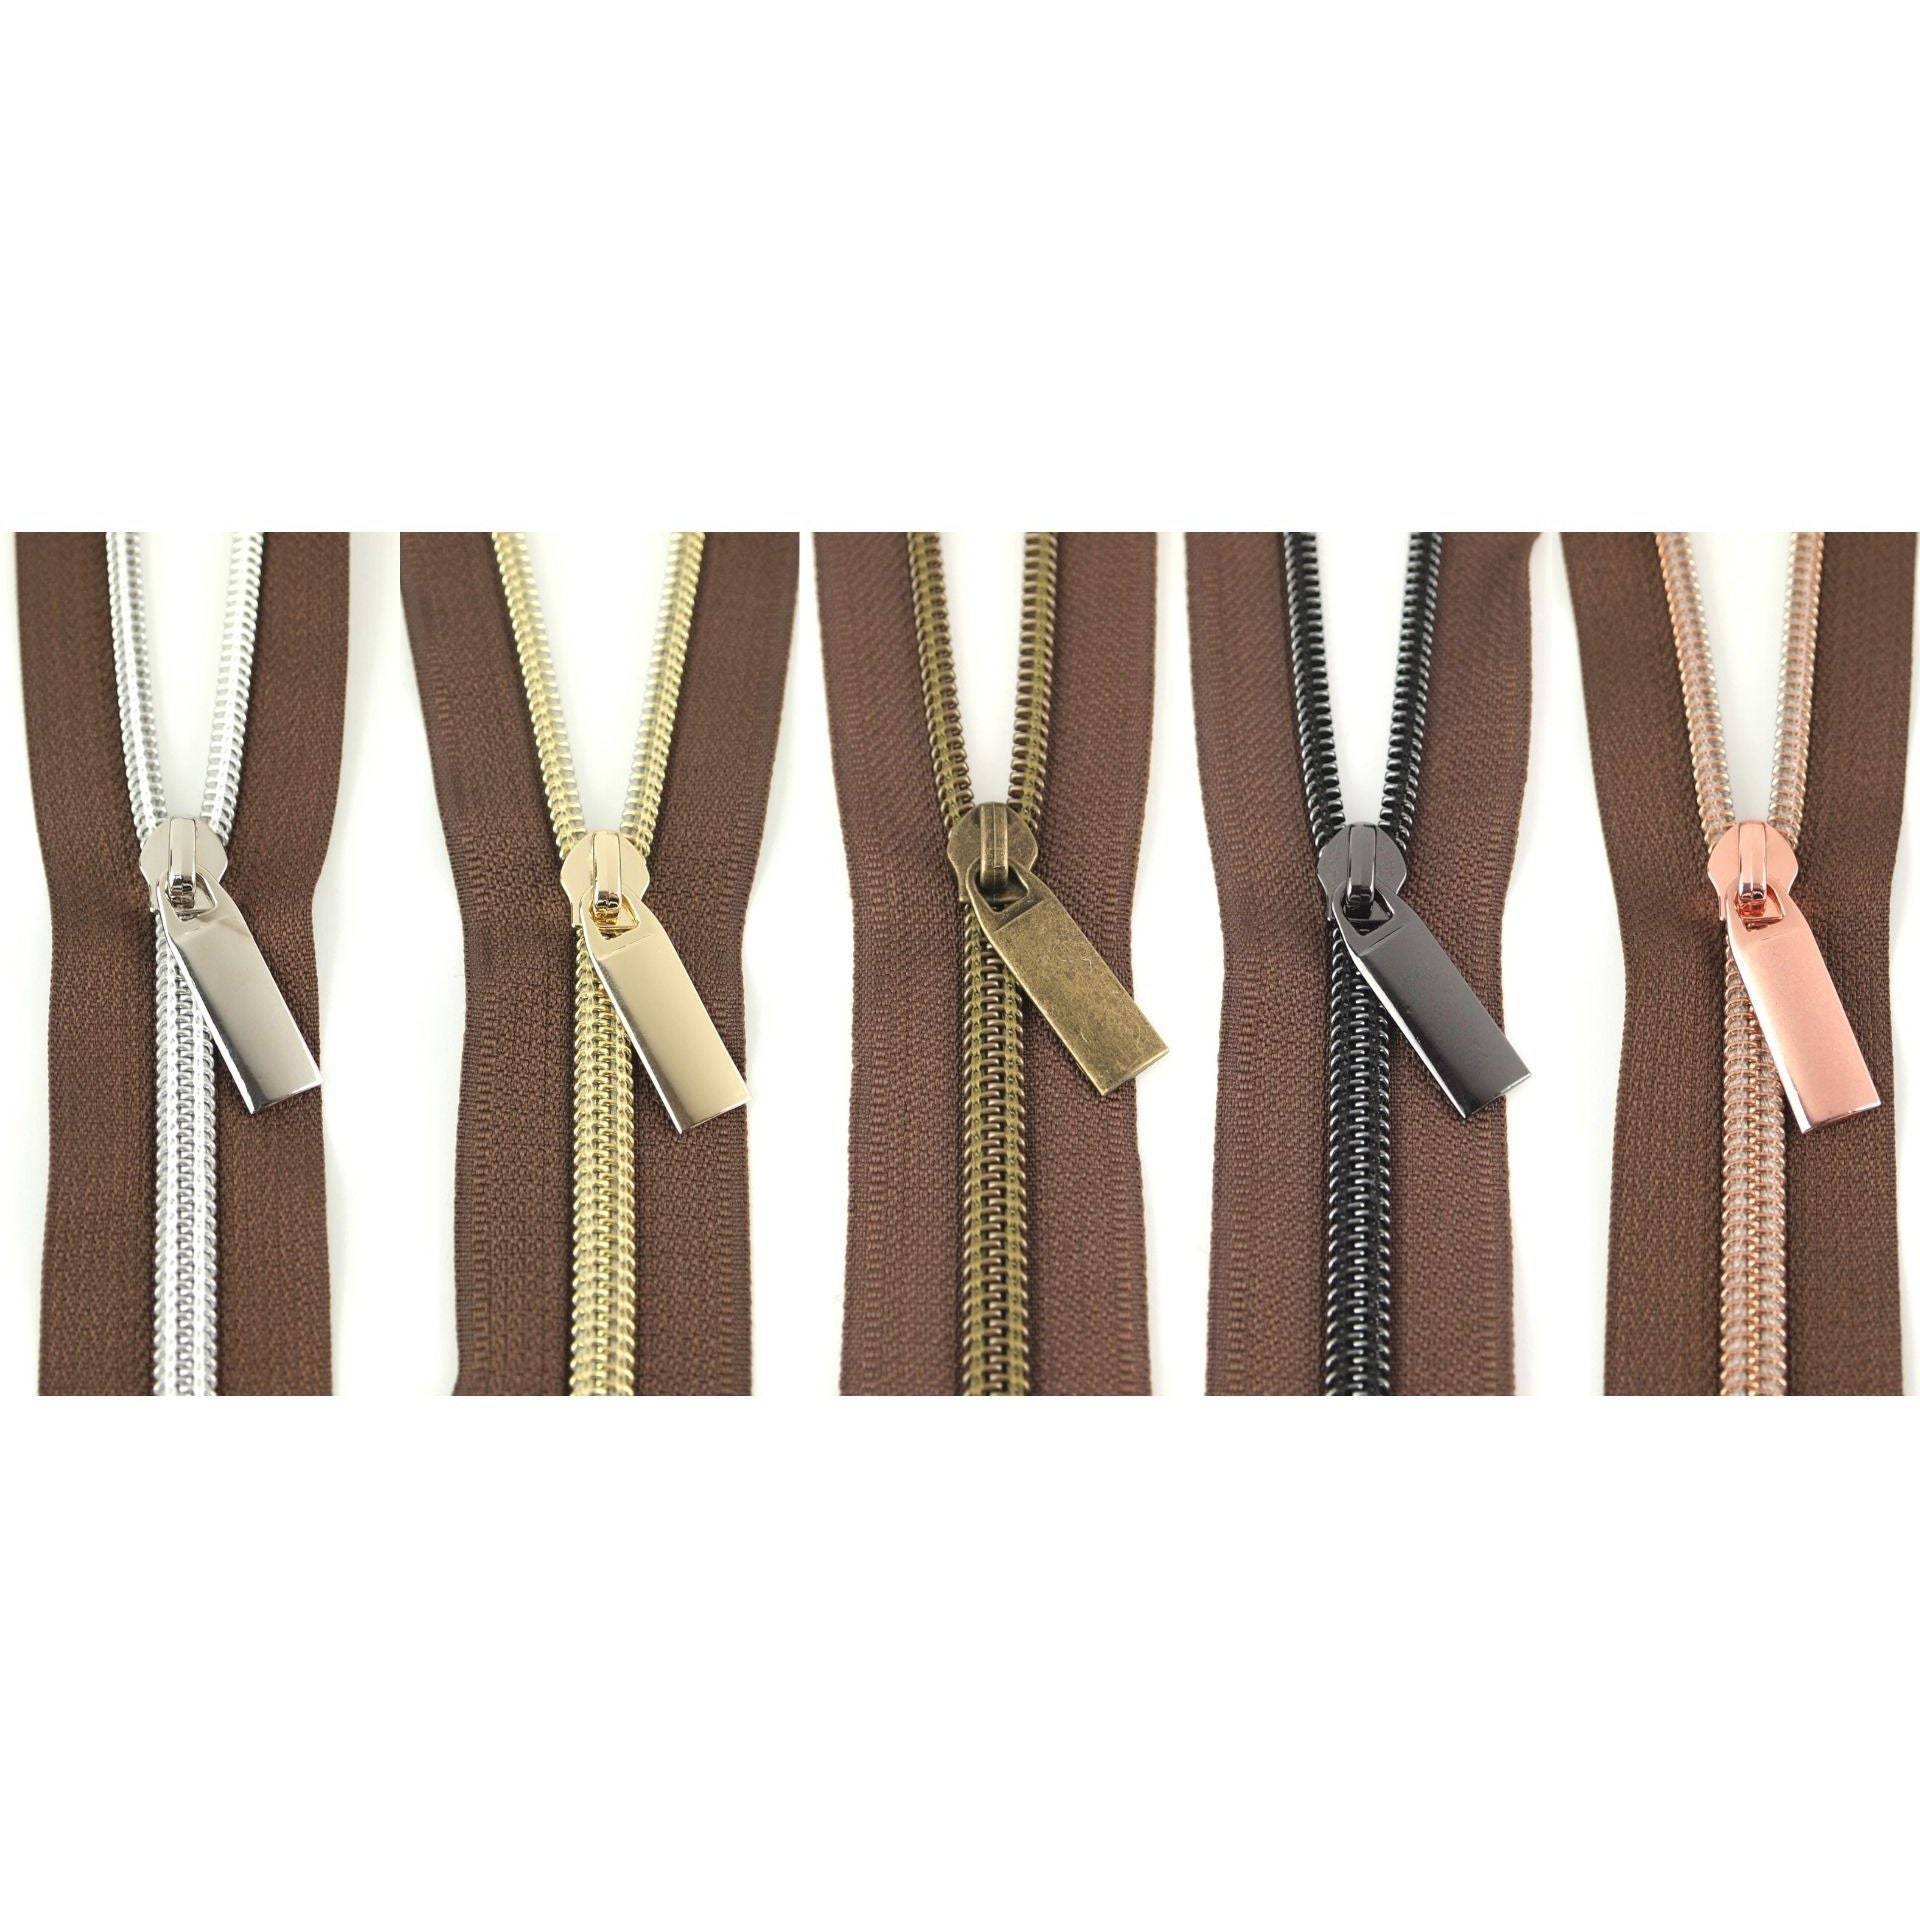 Brown #5 Nylon Coil Zippers: 3 Yards with 9 Pulls – Three Little